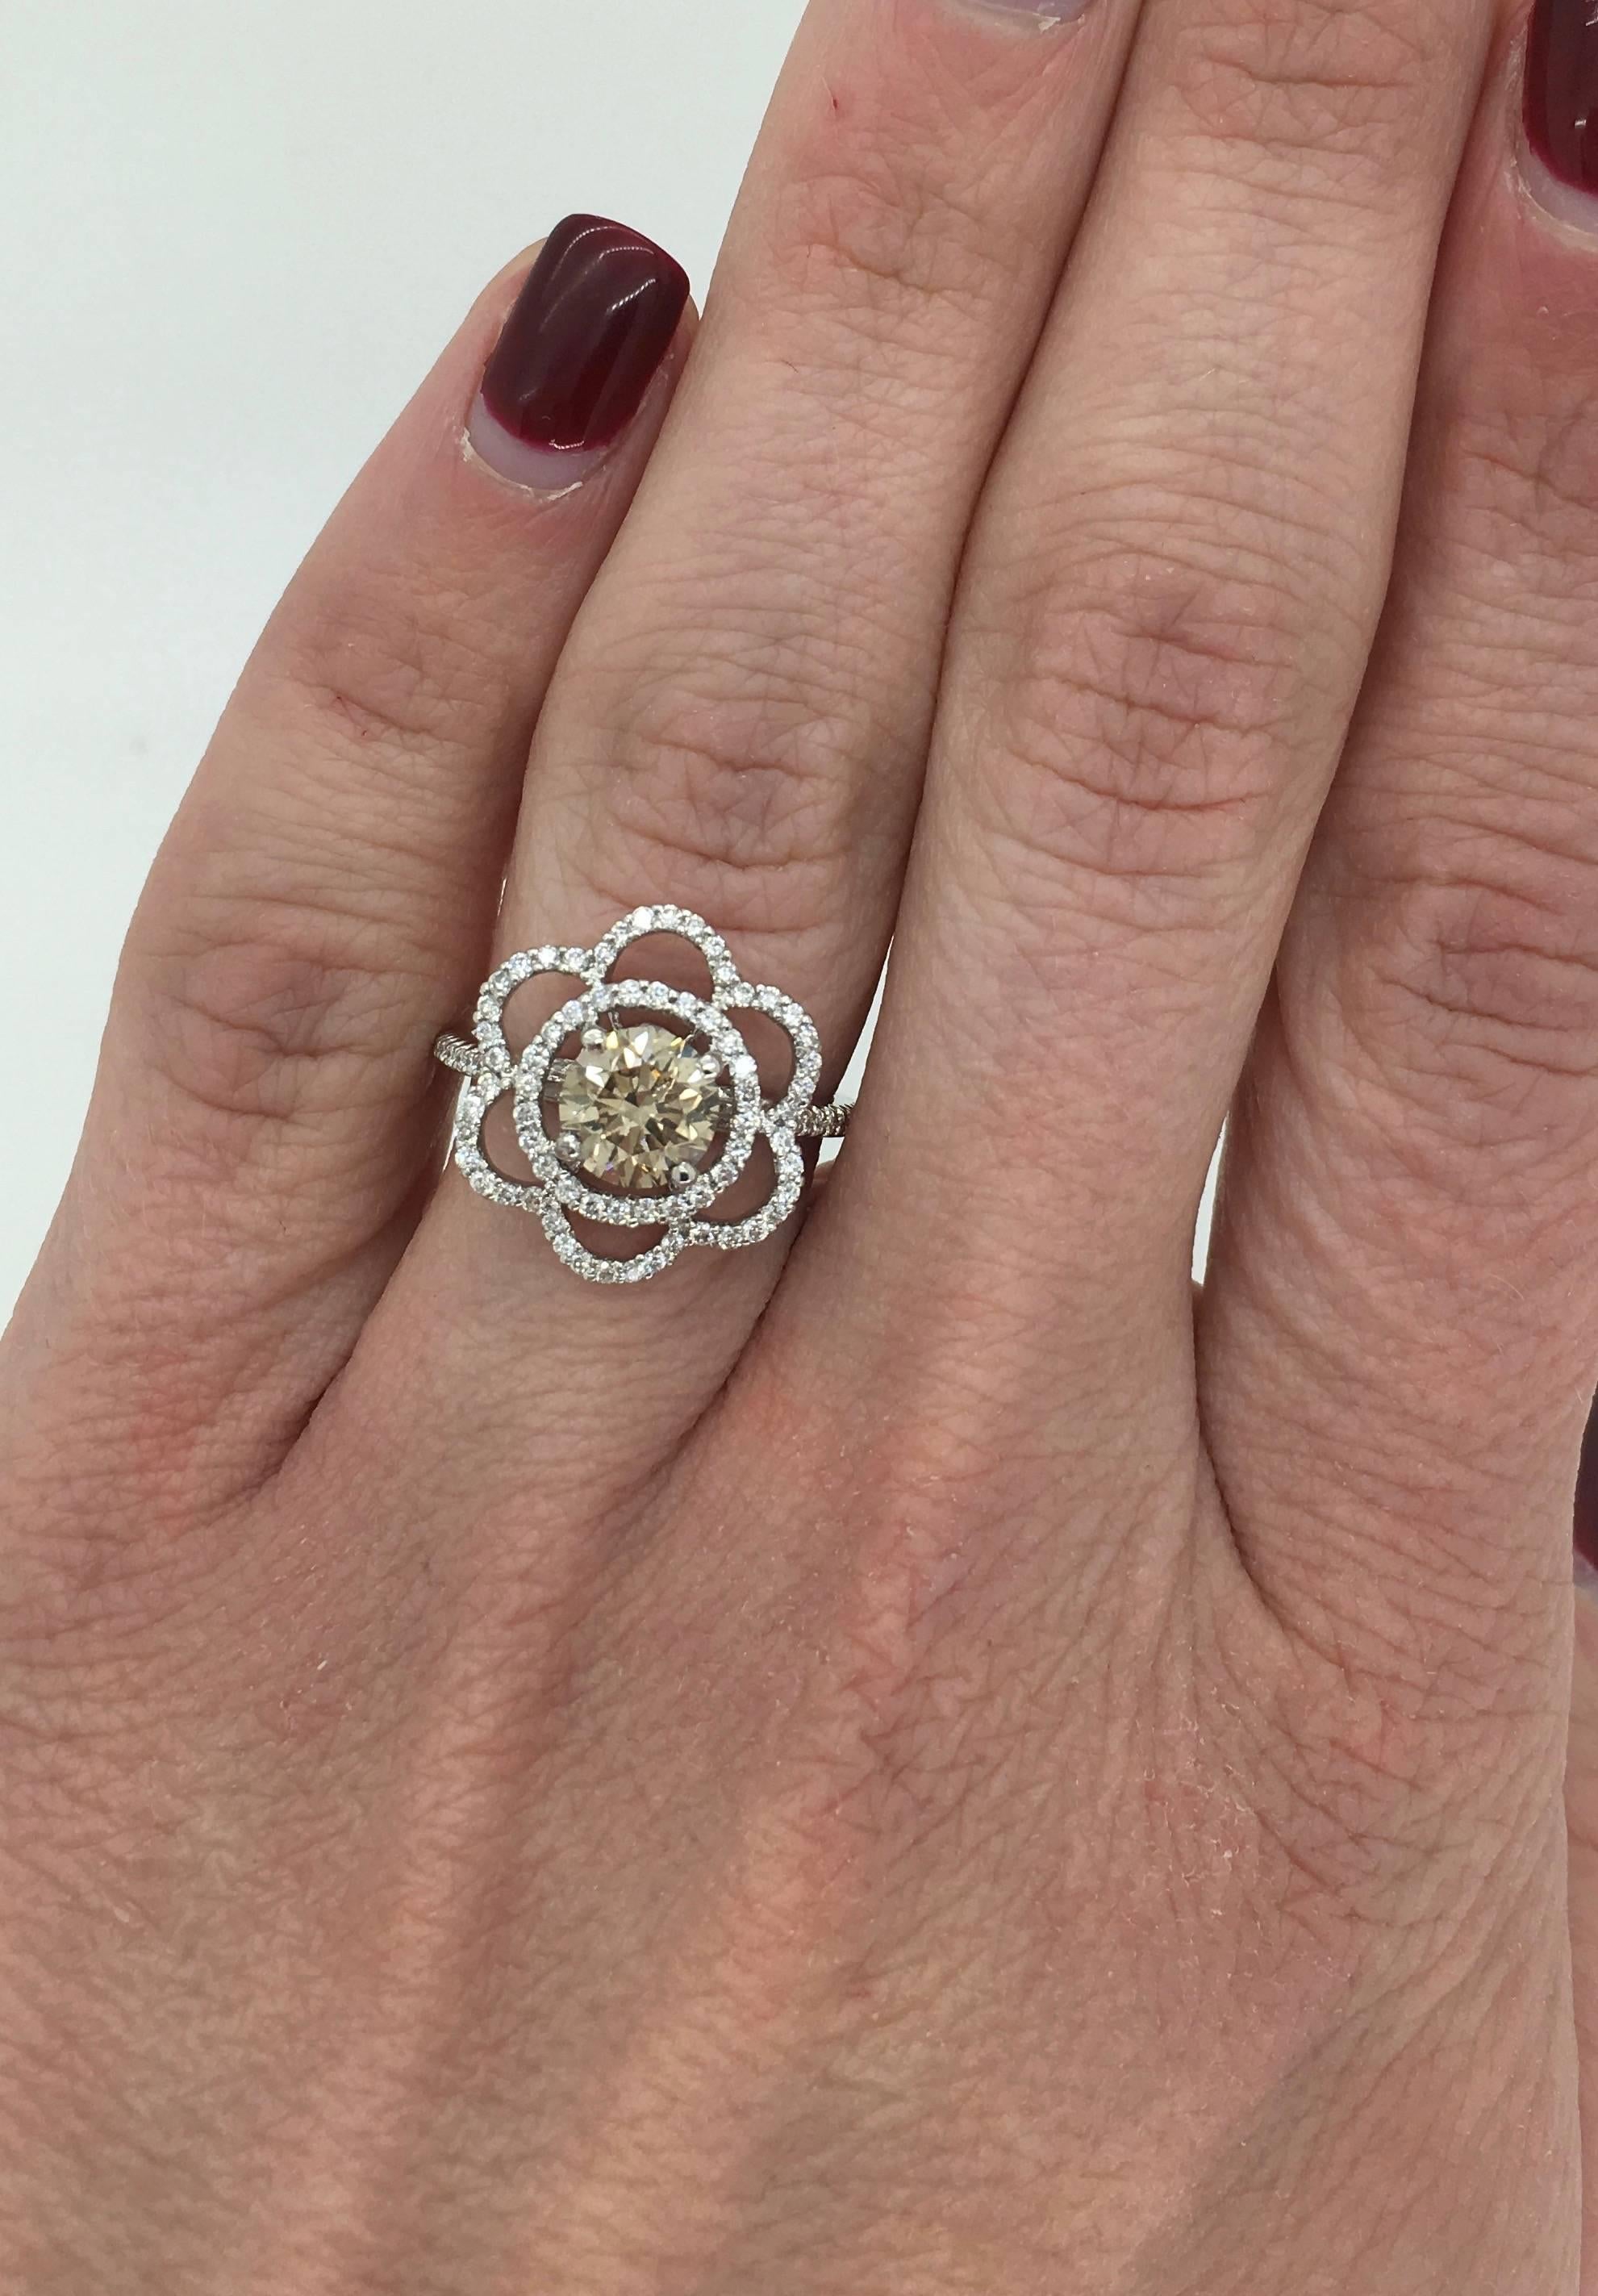 This flower shaped ring features a GIA Certified 1.12CT Round Brilliant Cut Diamond with SI1 clarity and Fancy Light Brown Color. There is approximately .50CTW of additional Round Brilliant Cut Diamonds surrounding the featured diamond; these